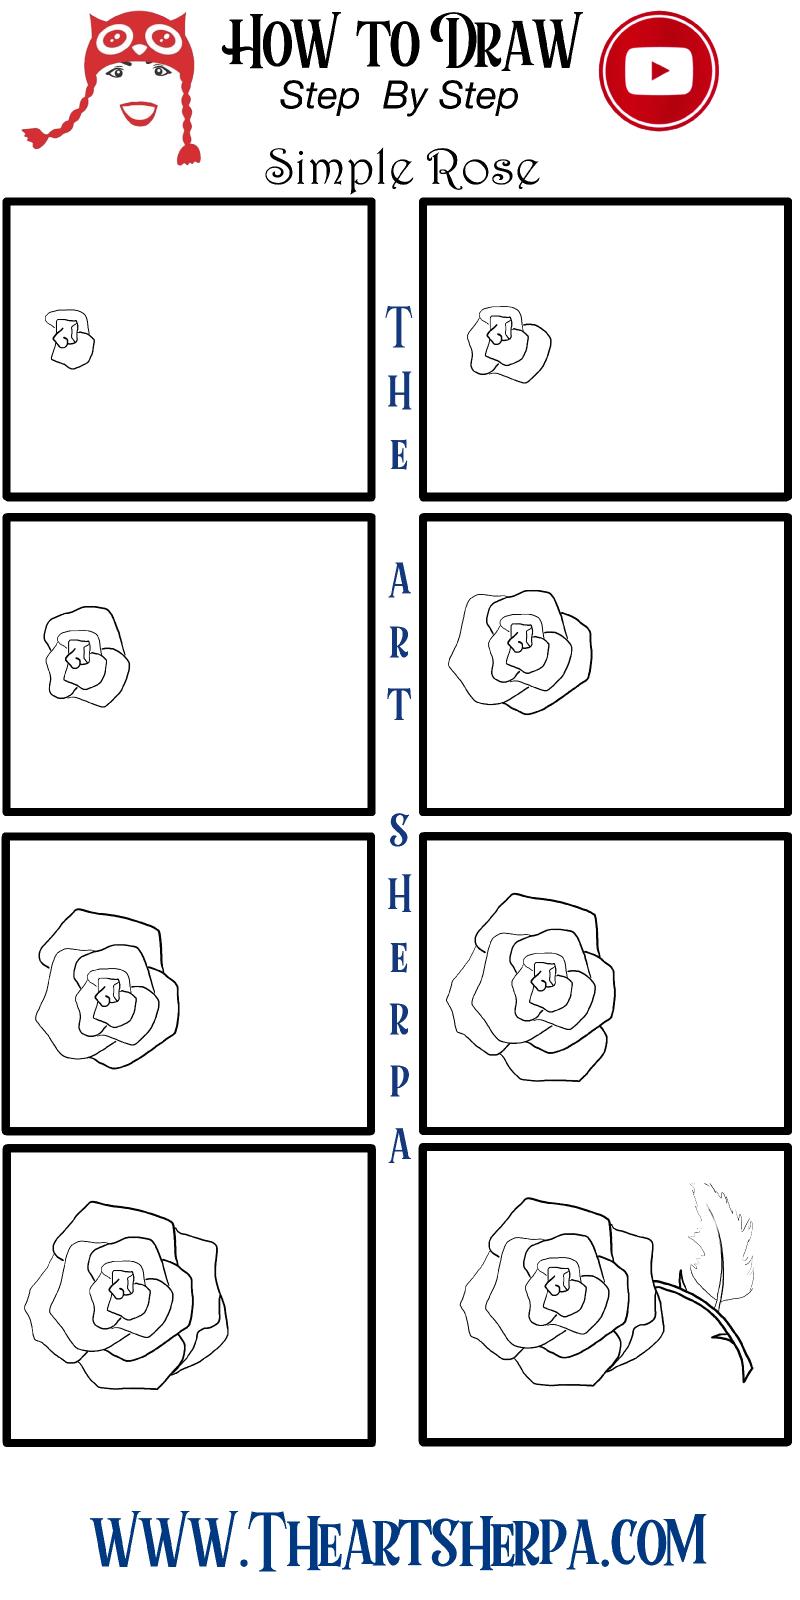 horizontal and Verticle Step by Step draw a Rose .jpg